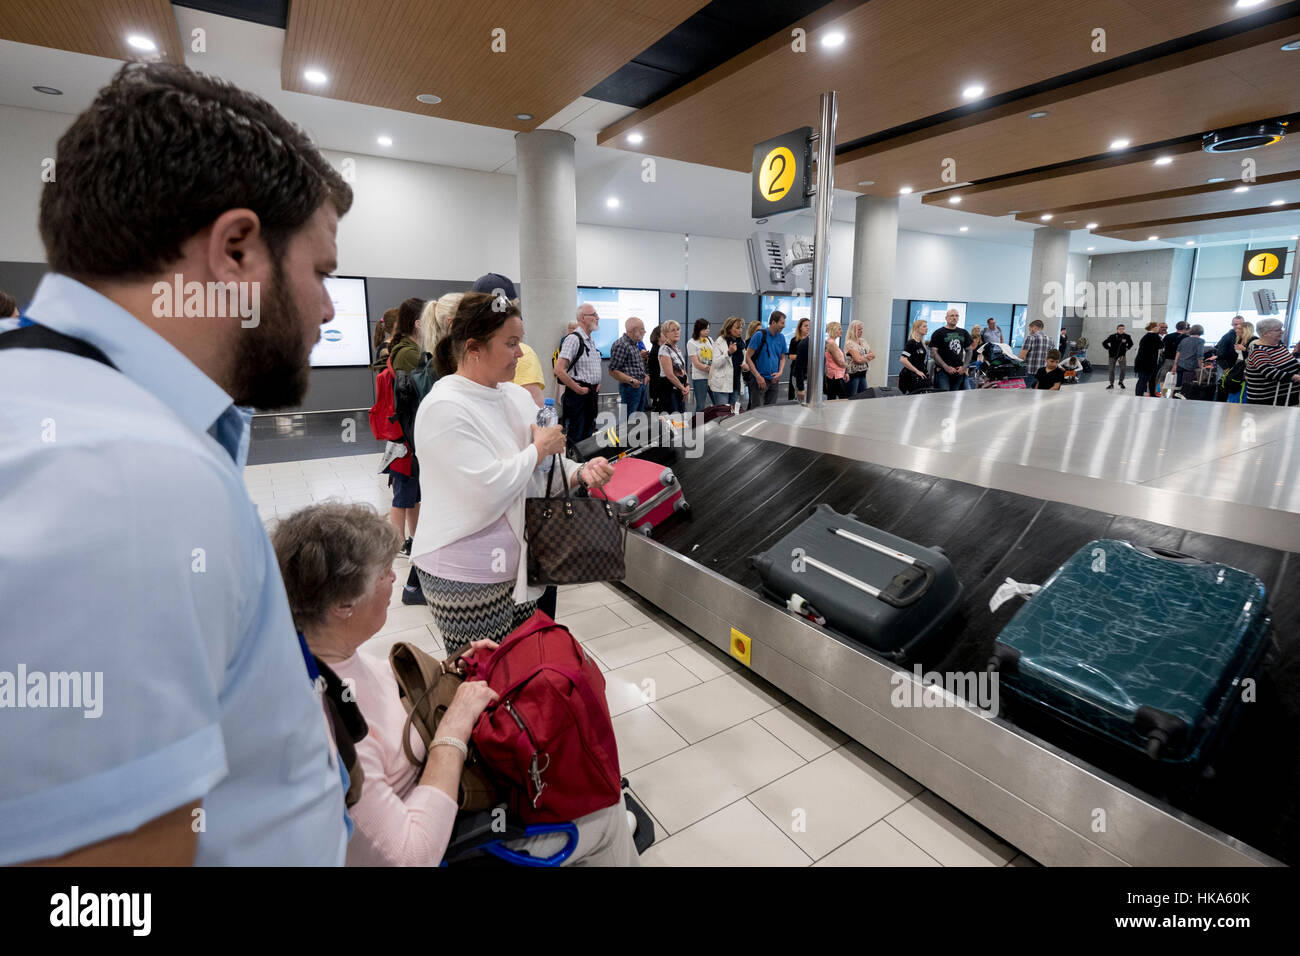 Passengers waiting for their luggage at Larnaca airport, Cyprus. Stock Photo